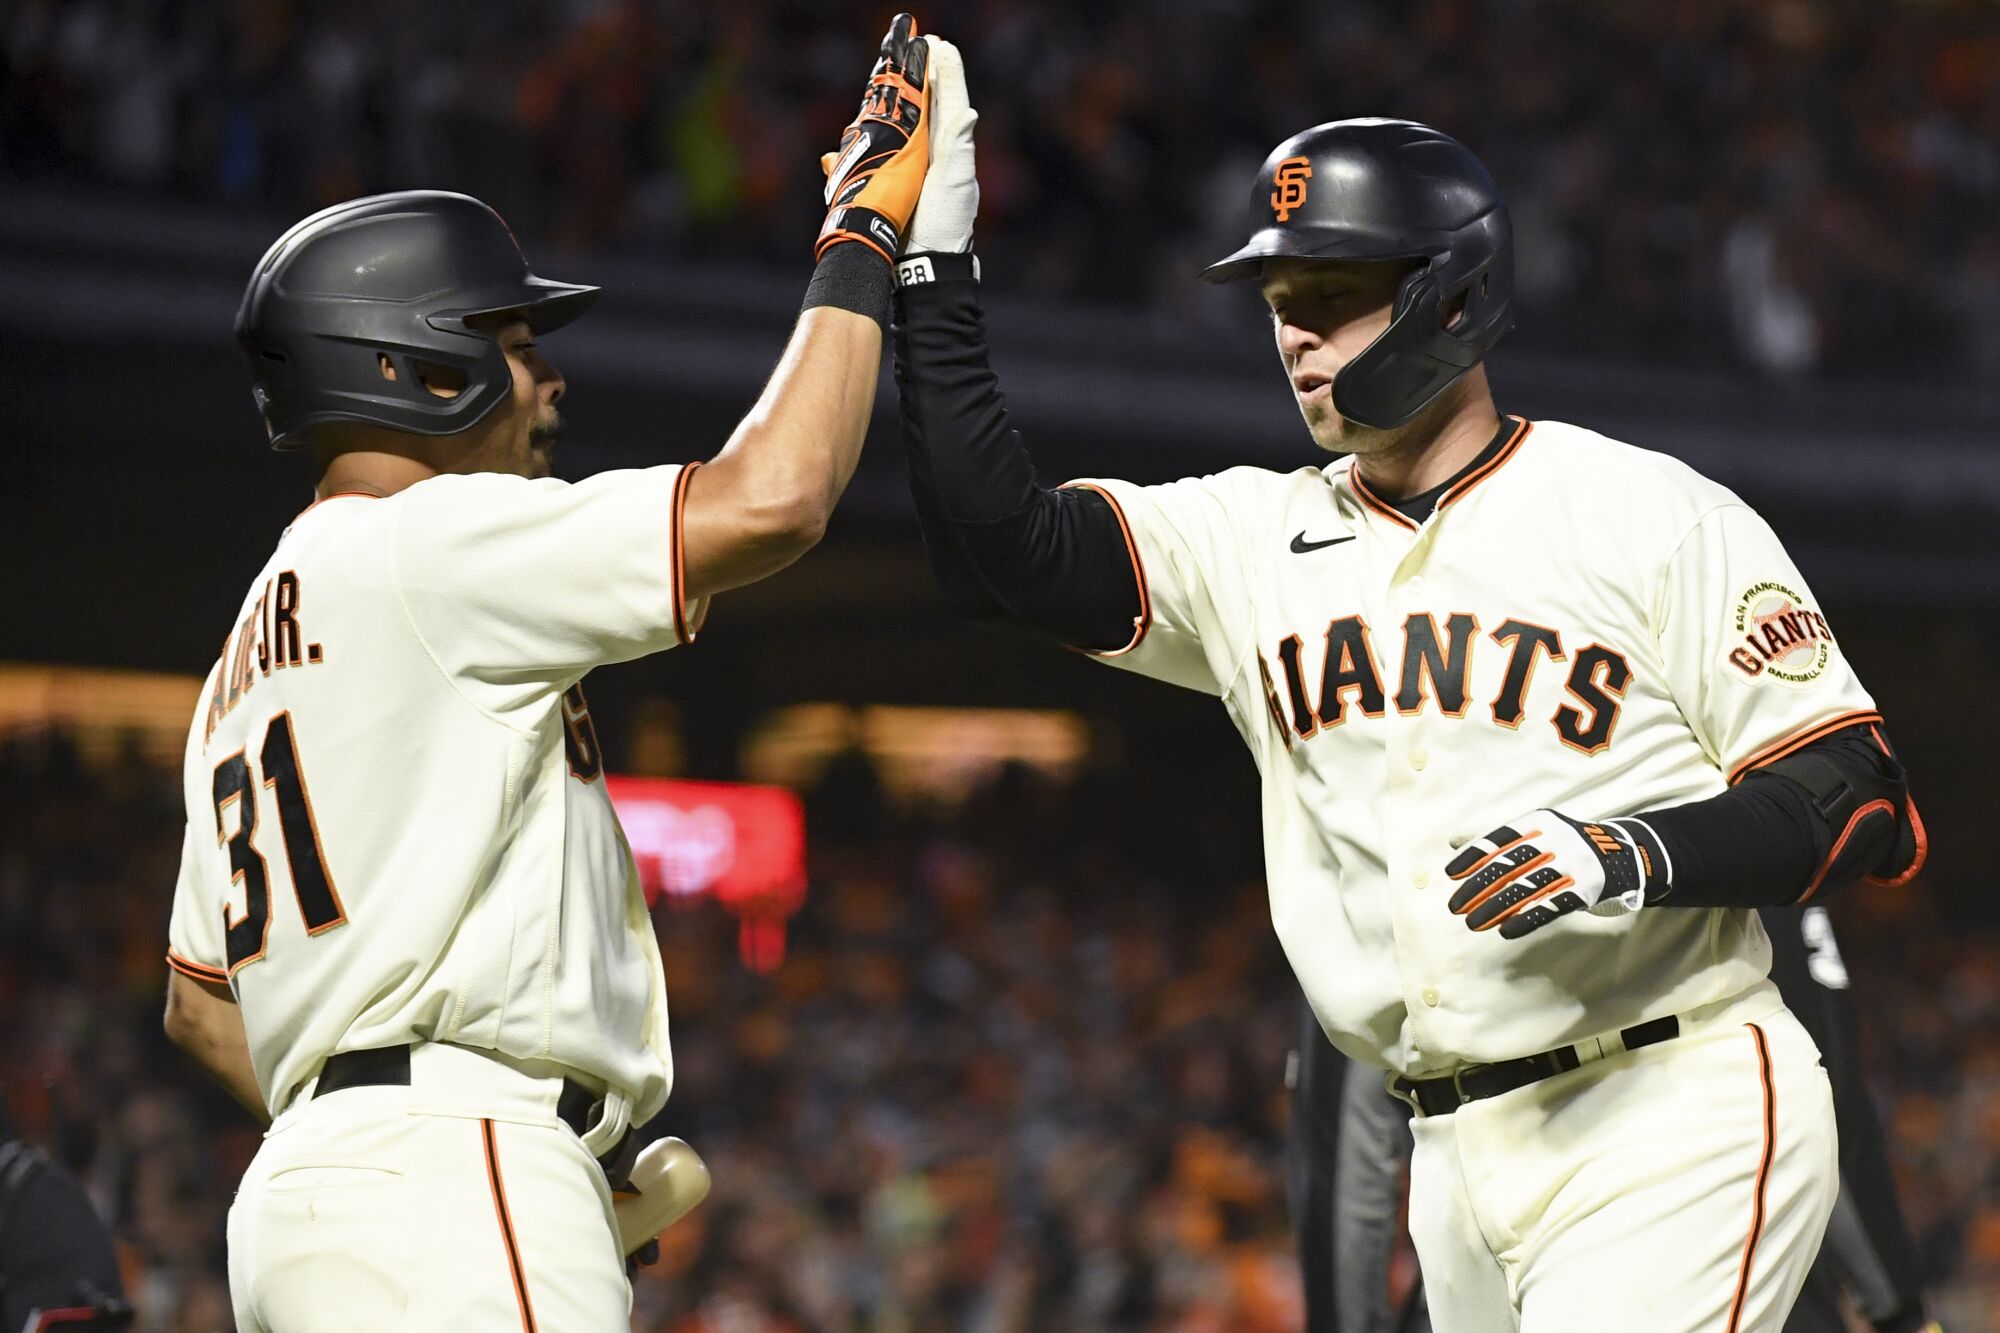  Giants' Buster Posey celebrates with Tommy La Stella.